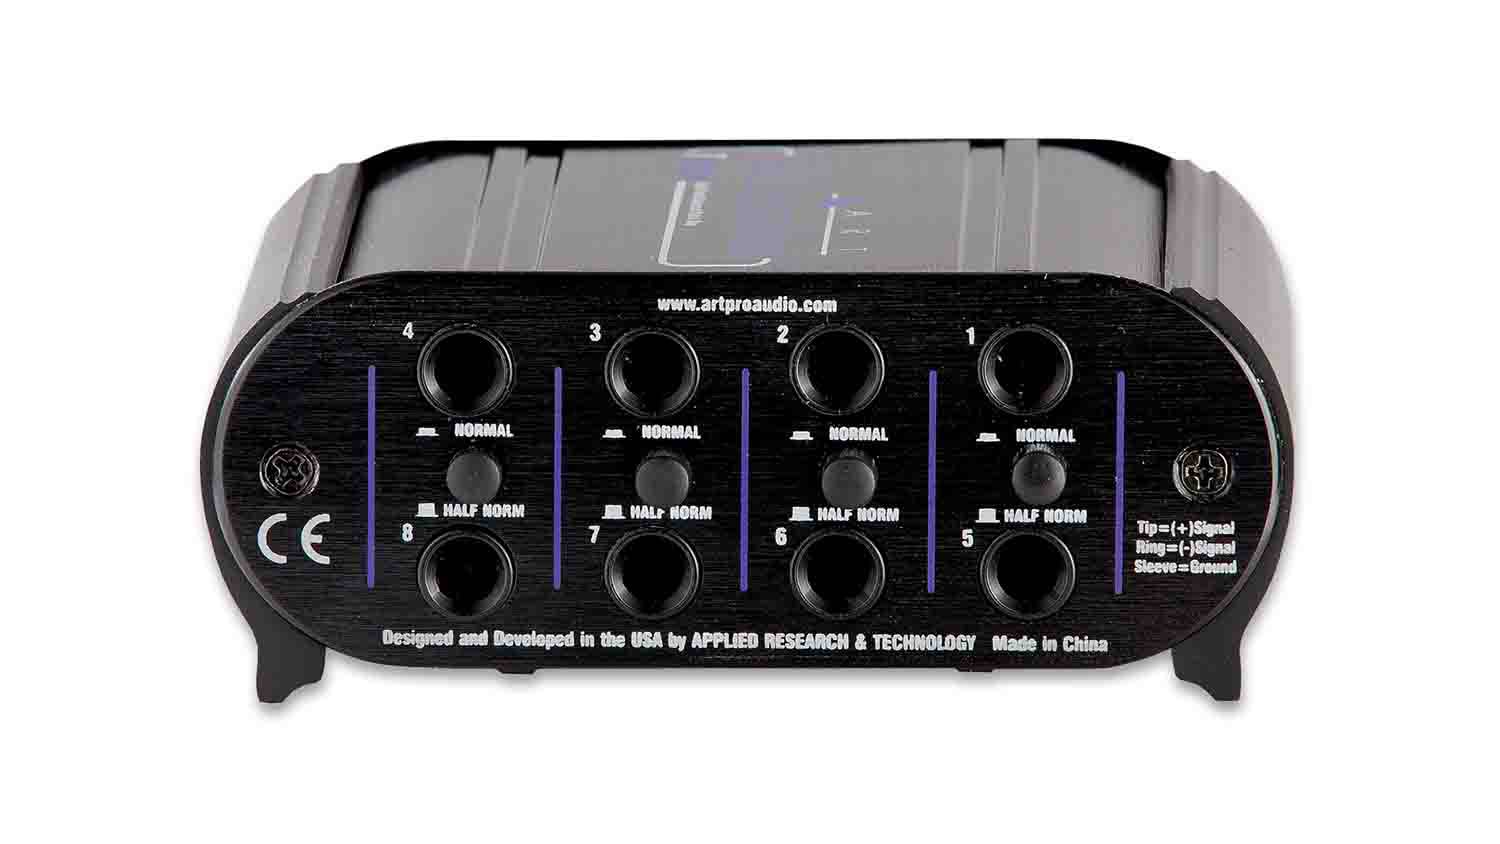 Art TPATCH Eight Point Balanced Patch Bay - Hollywood DJ